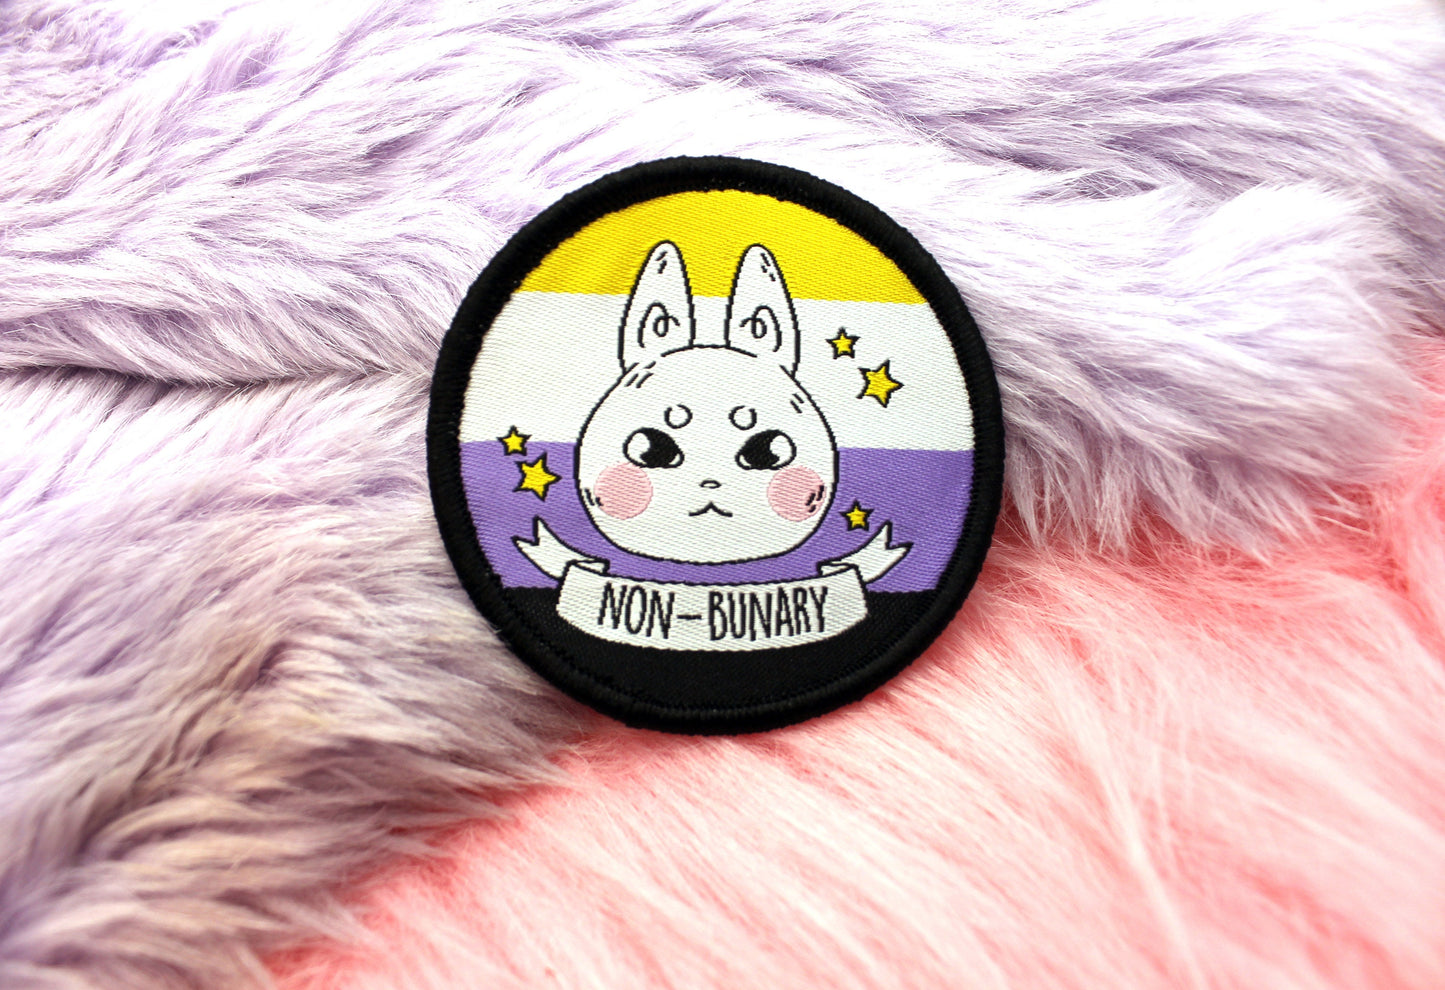 Non-Bunary Iron-On Patch (60mm) - non-binary bunny rabbit embroidered patch